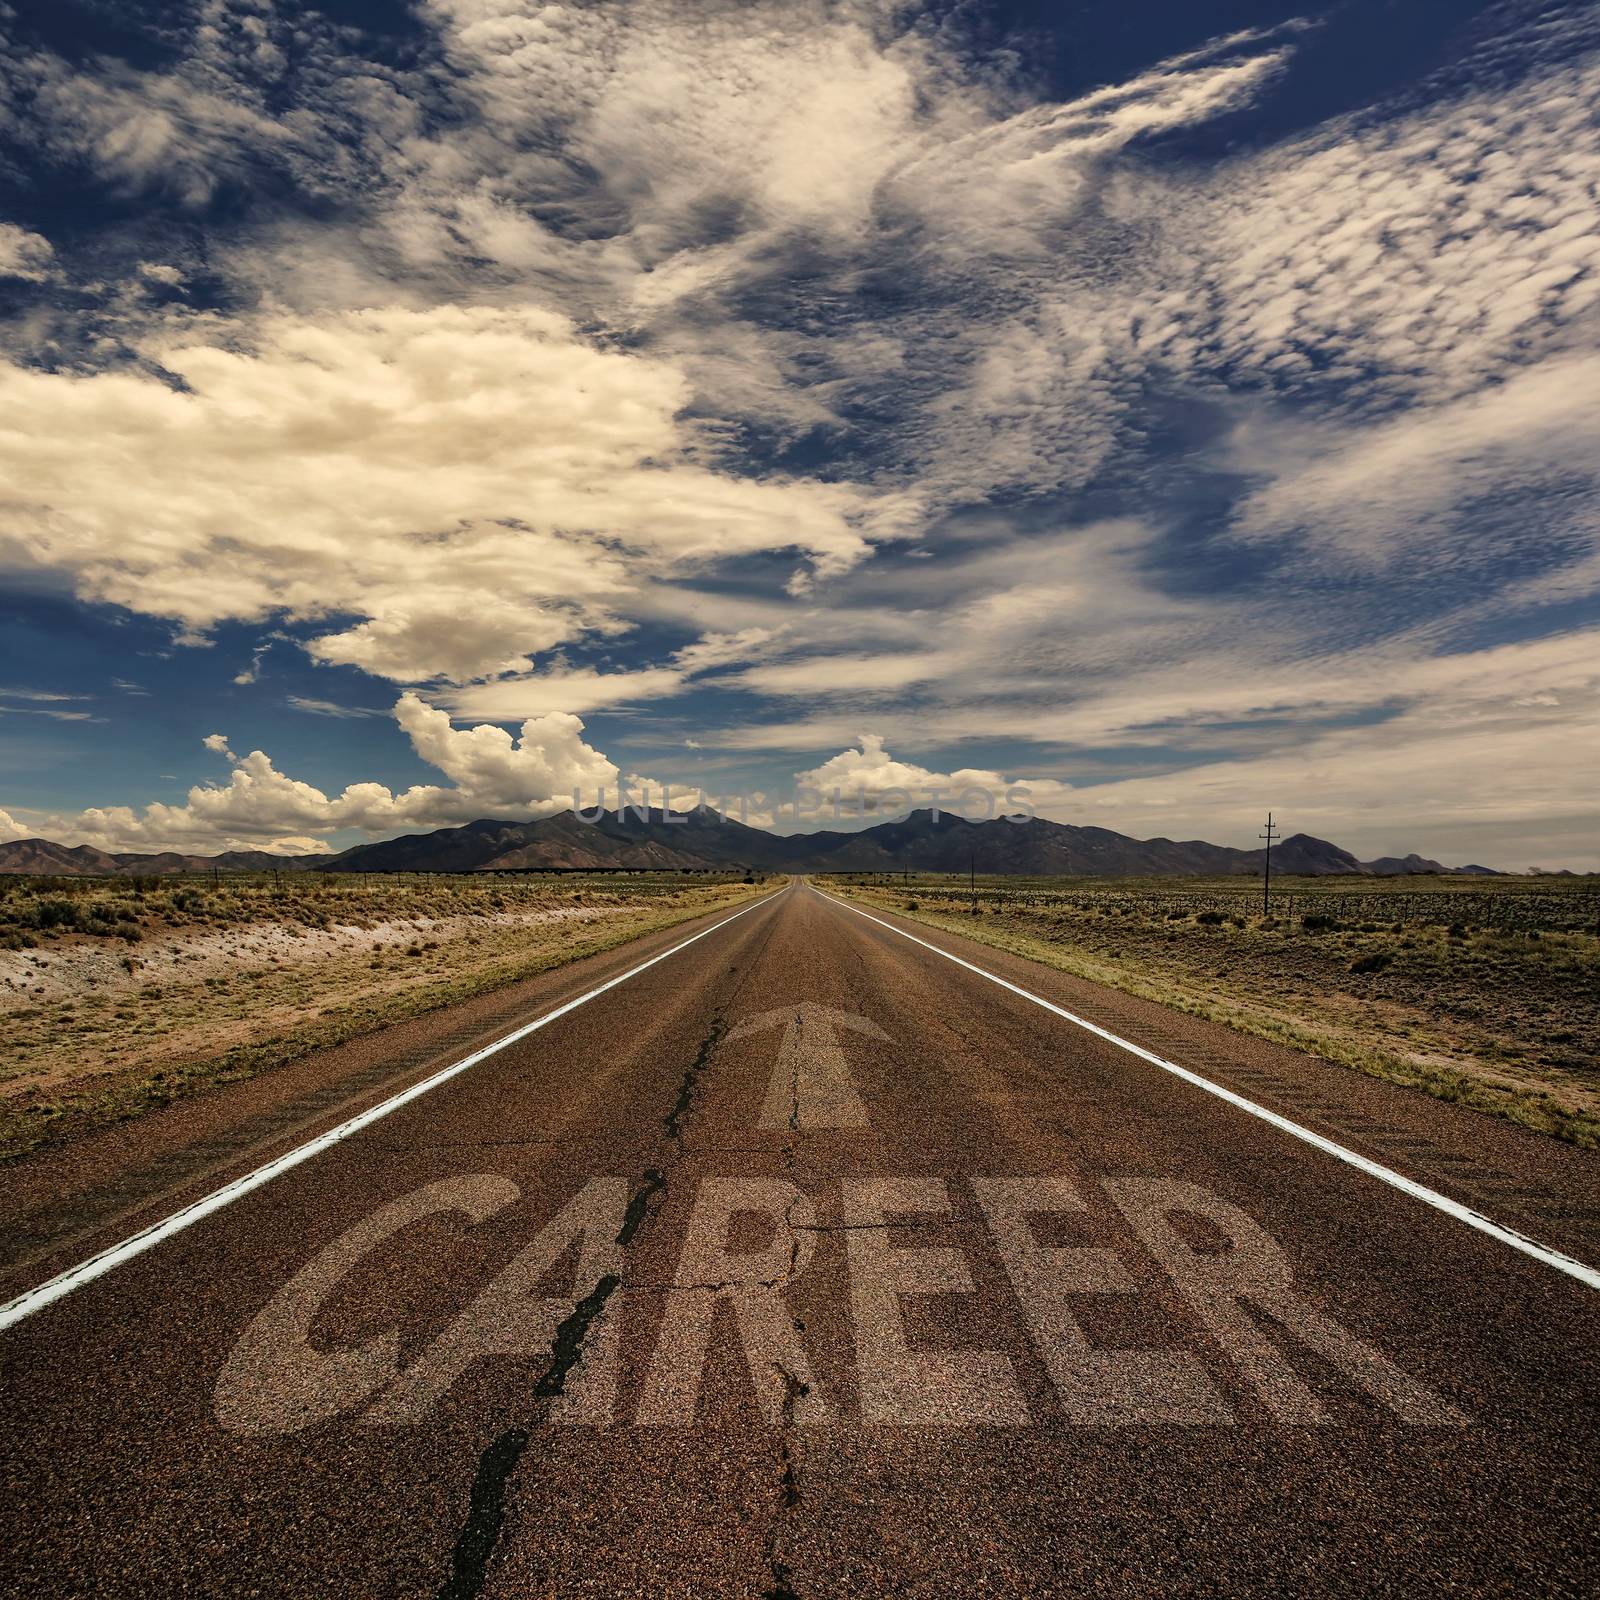 Conceptual image of desert road with the word career and arrow